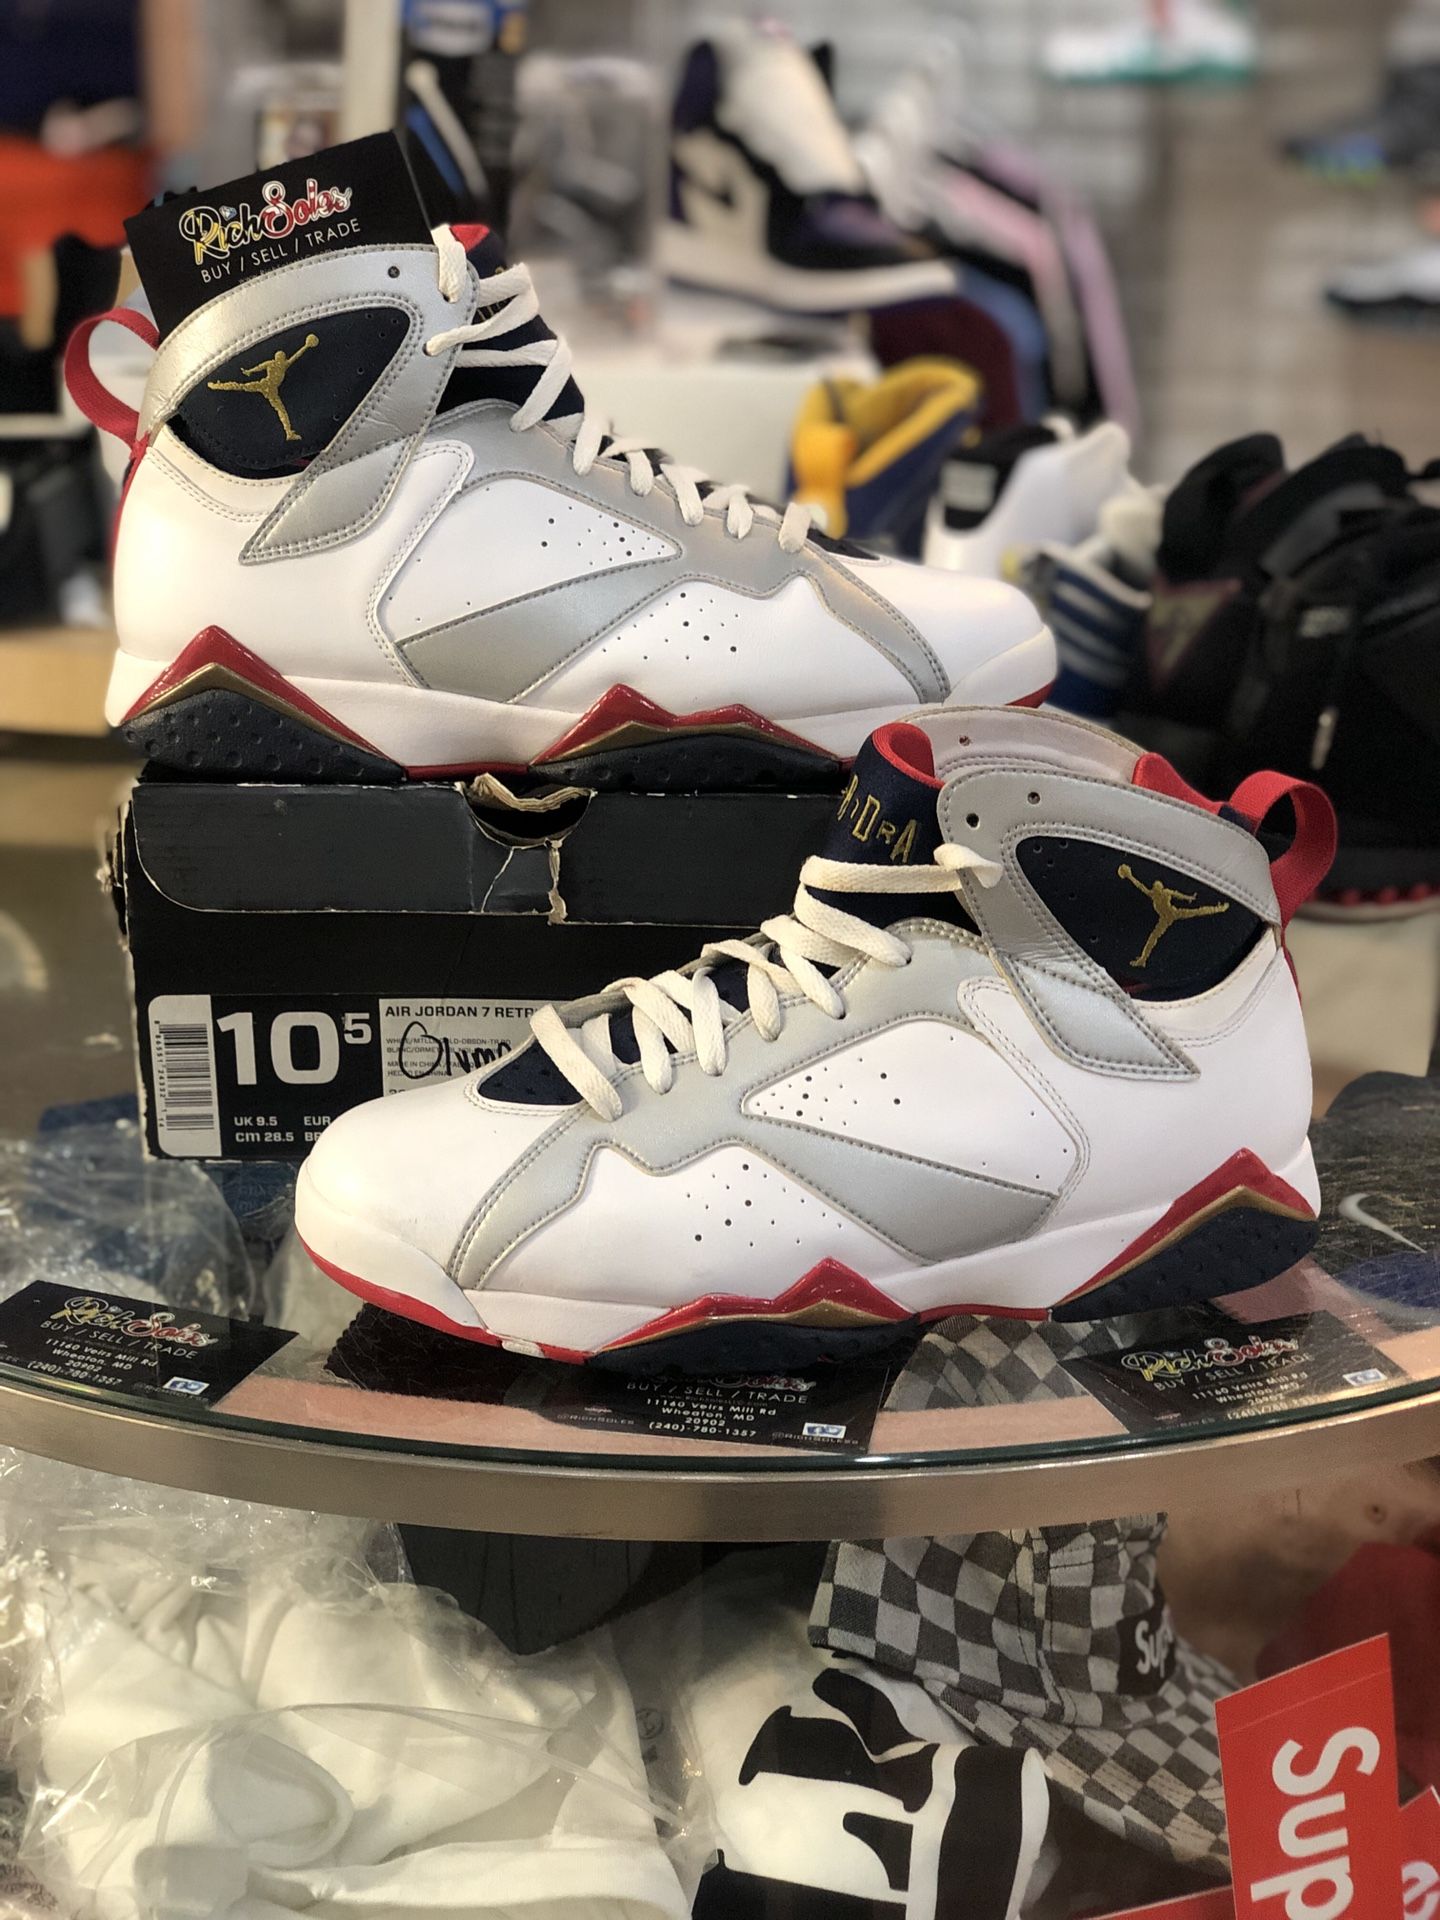 Olympic 7’s size 10.5